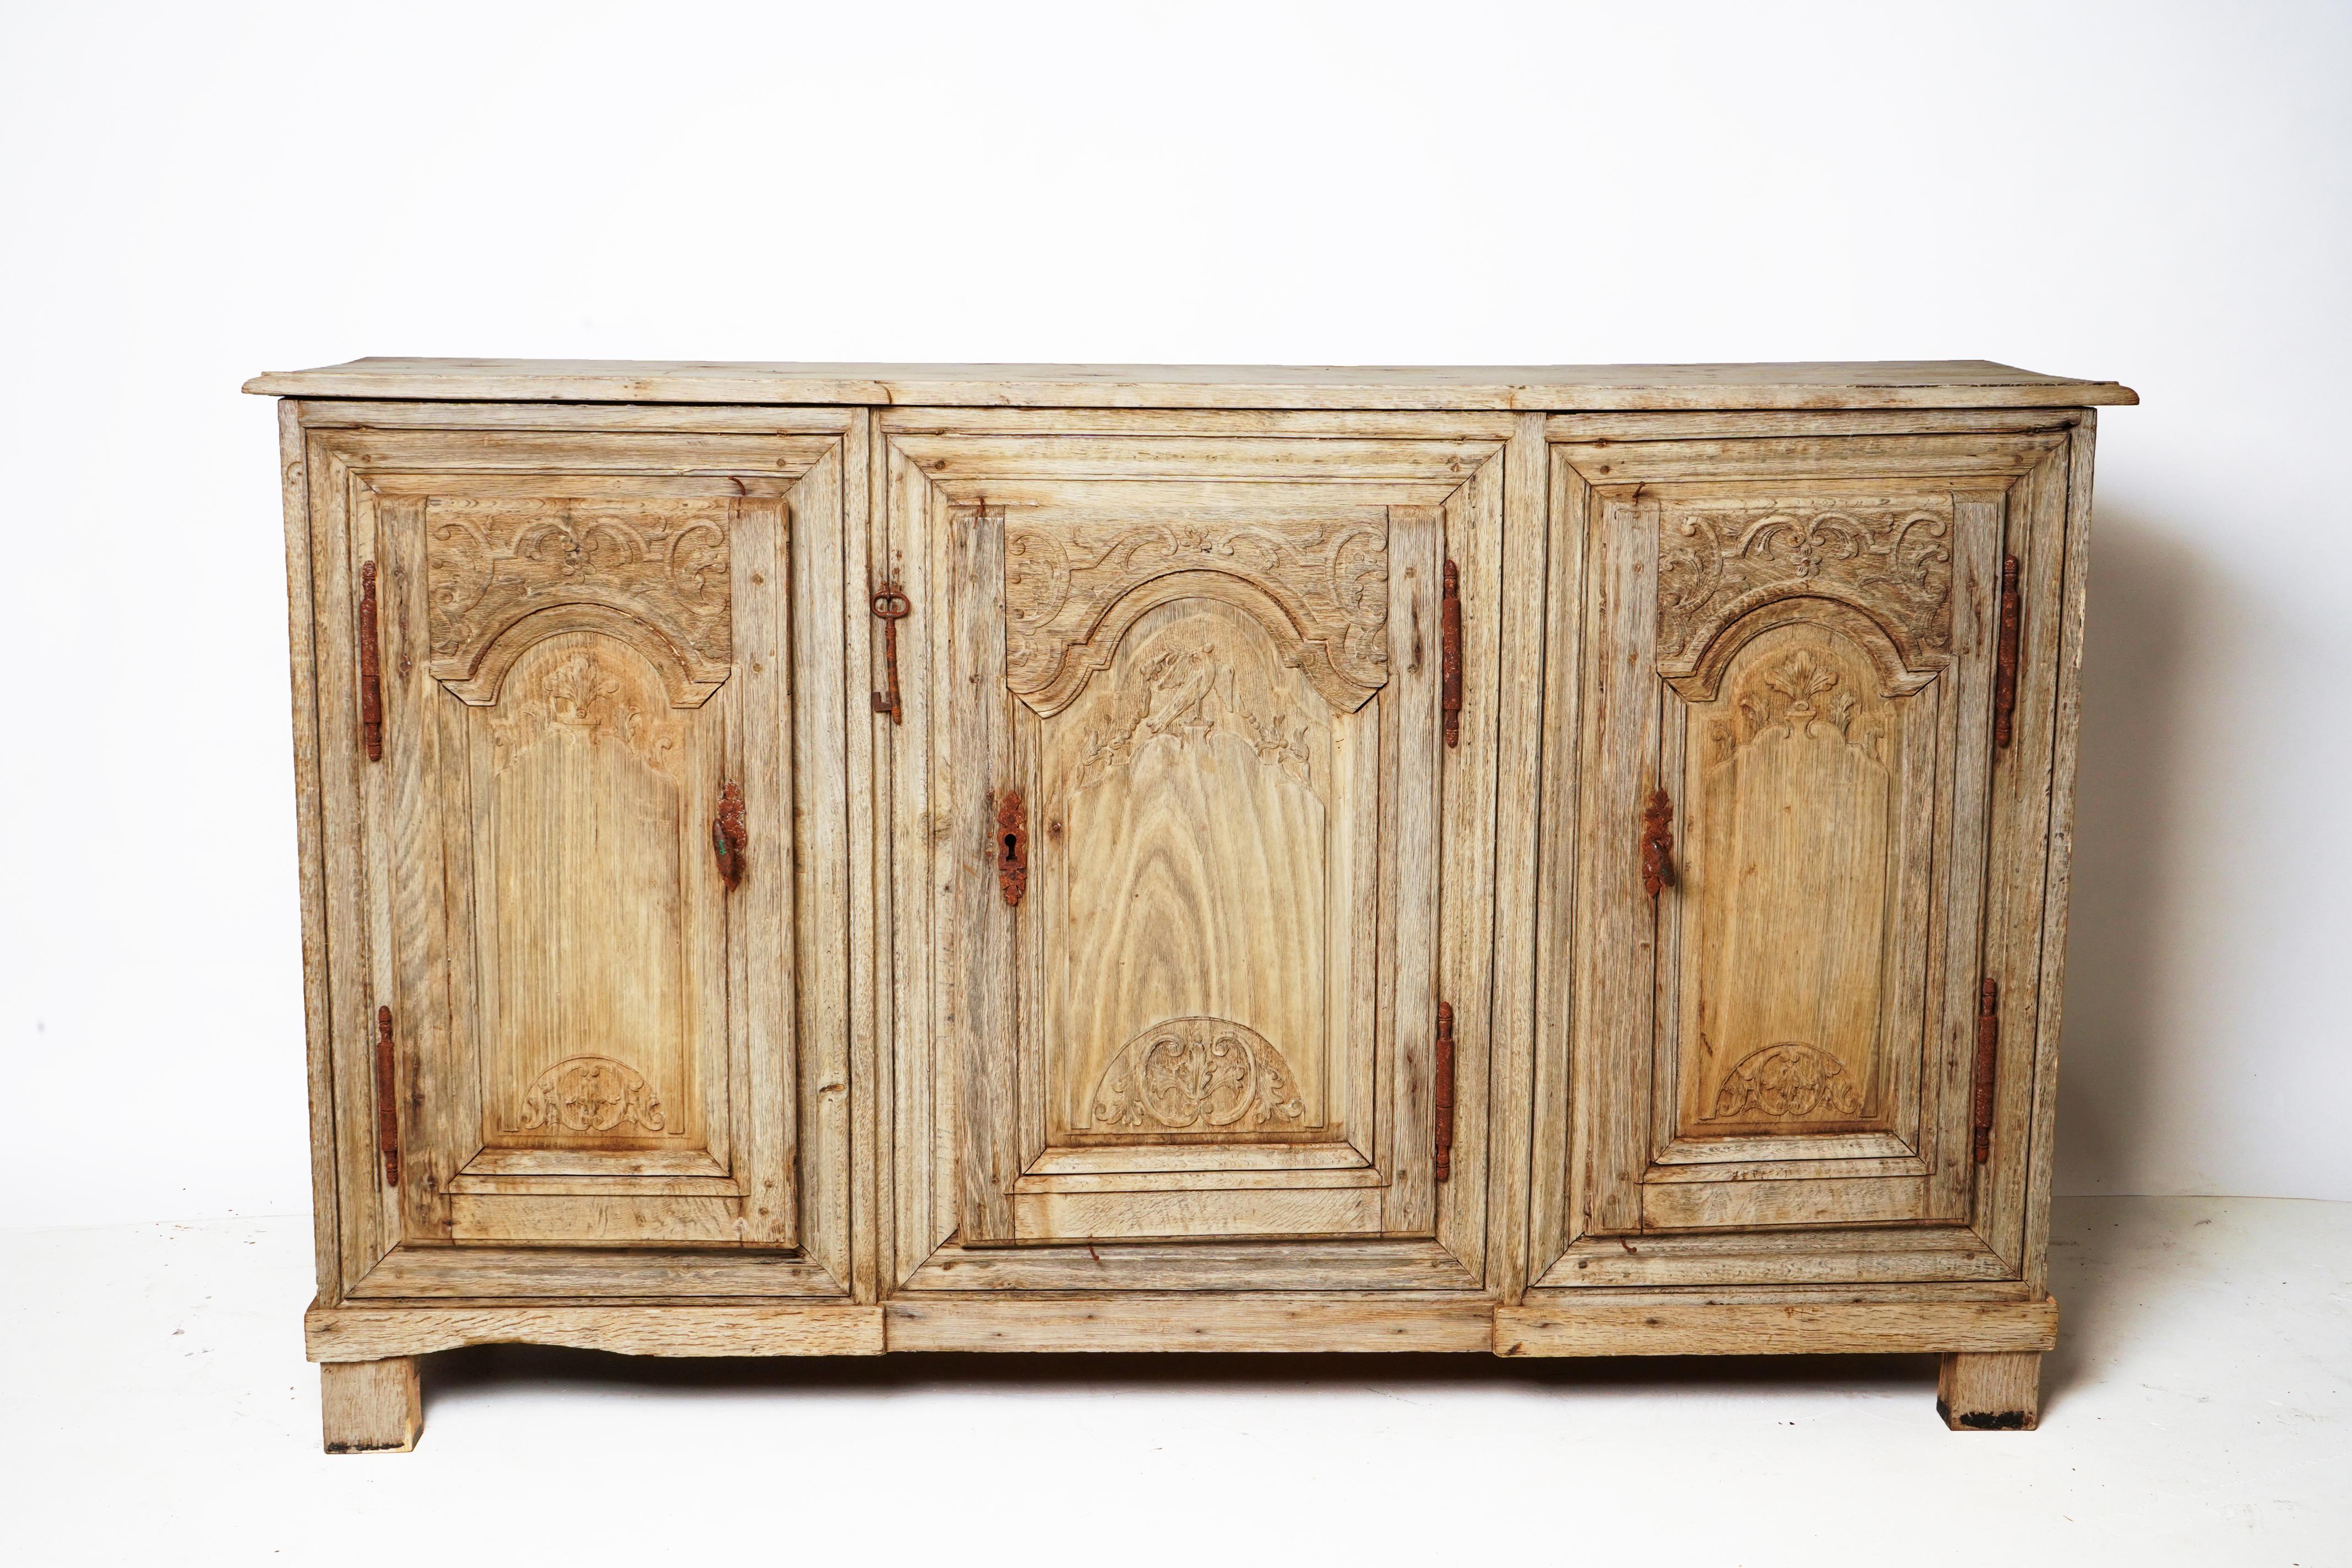 This smaller-scale French sideboard is made from white oak and features finely-carved scrollwork on the doors. Hinges are original. The piece has been stripped, scrubbed and bleached. The piece is Provencal in origin.